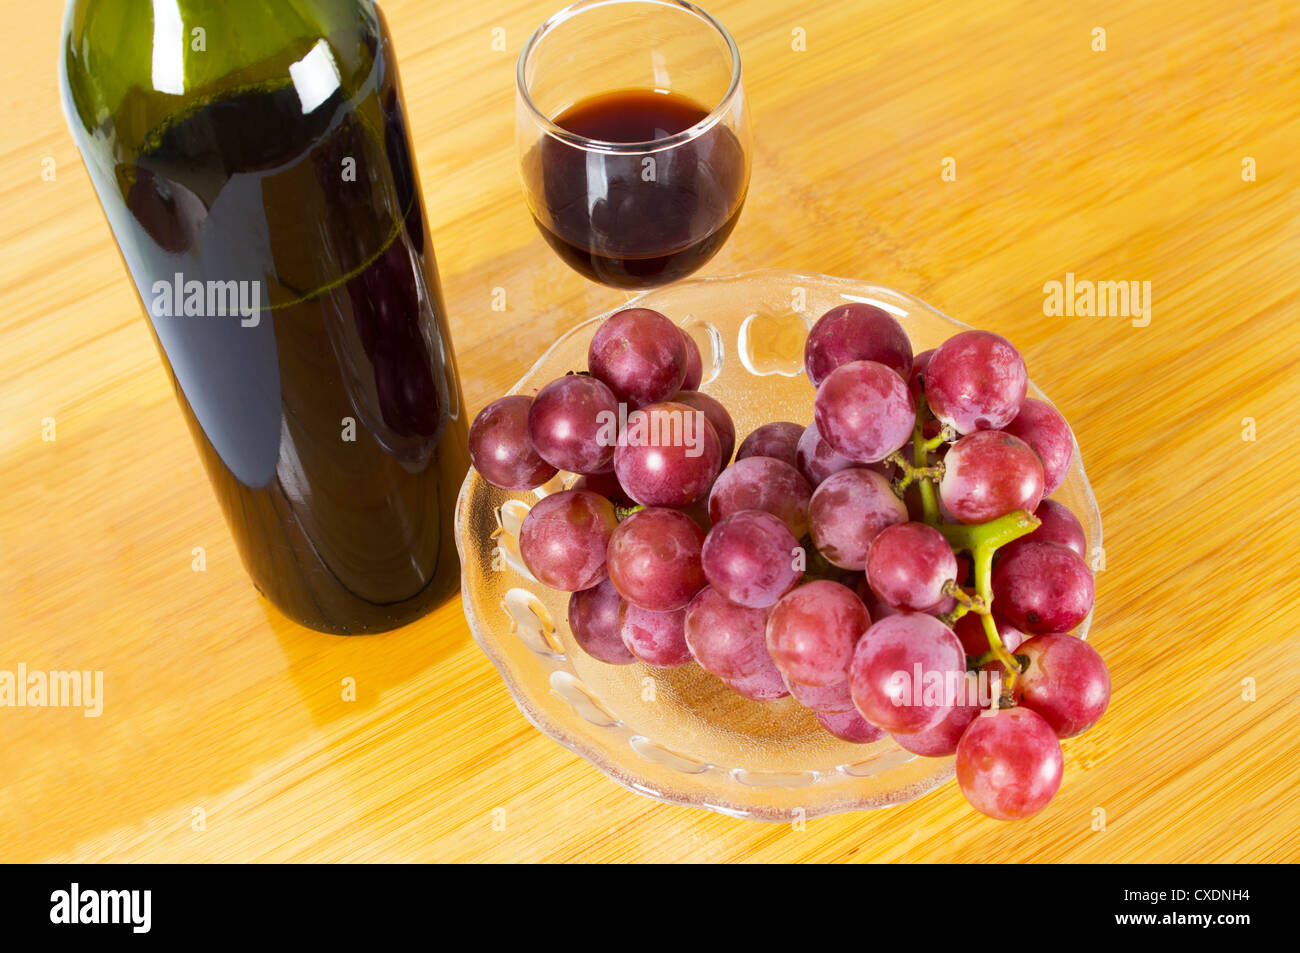 The purple grape and wine background pictures Stock Photo